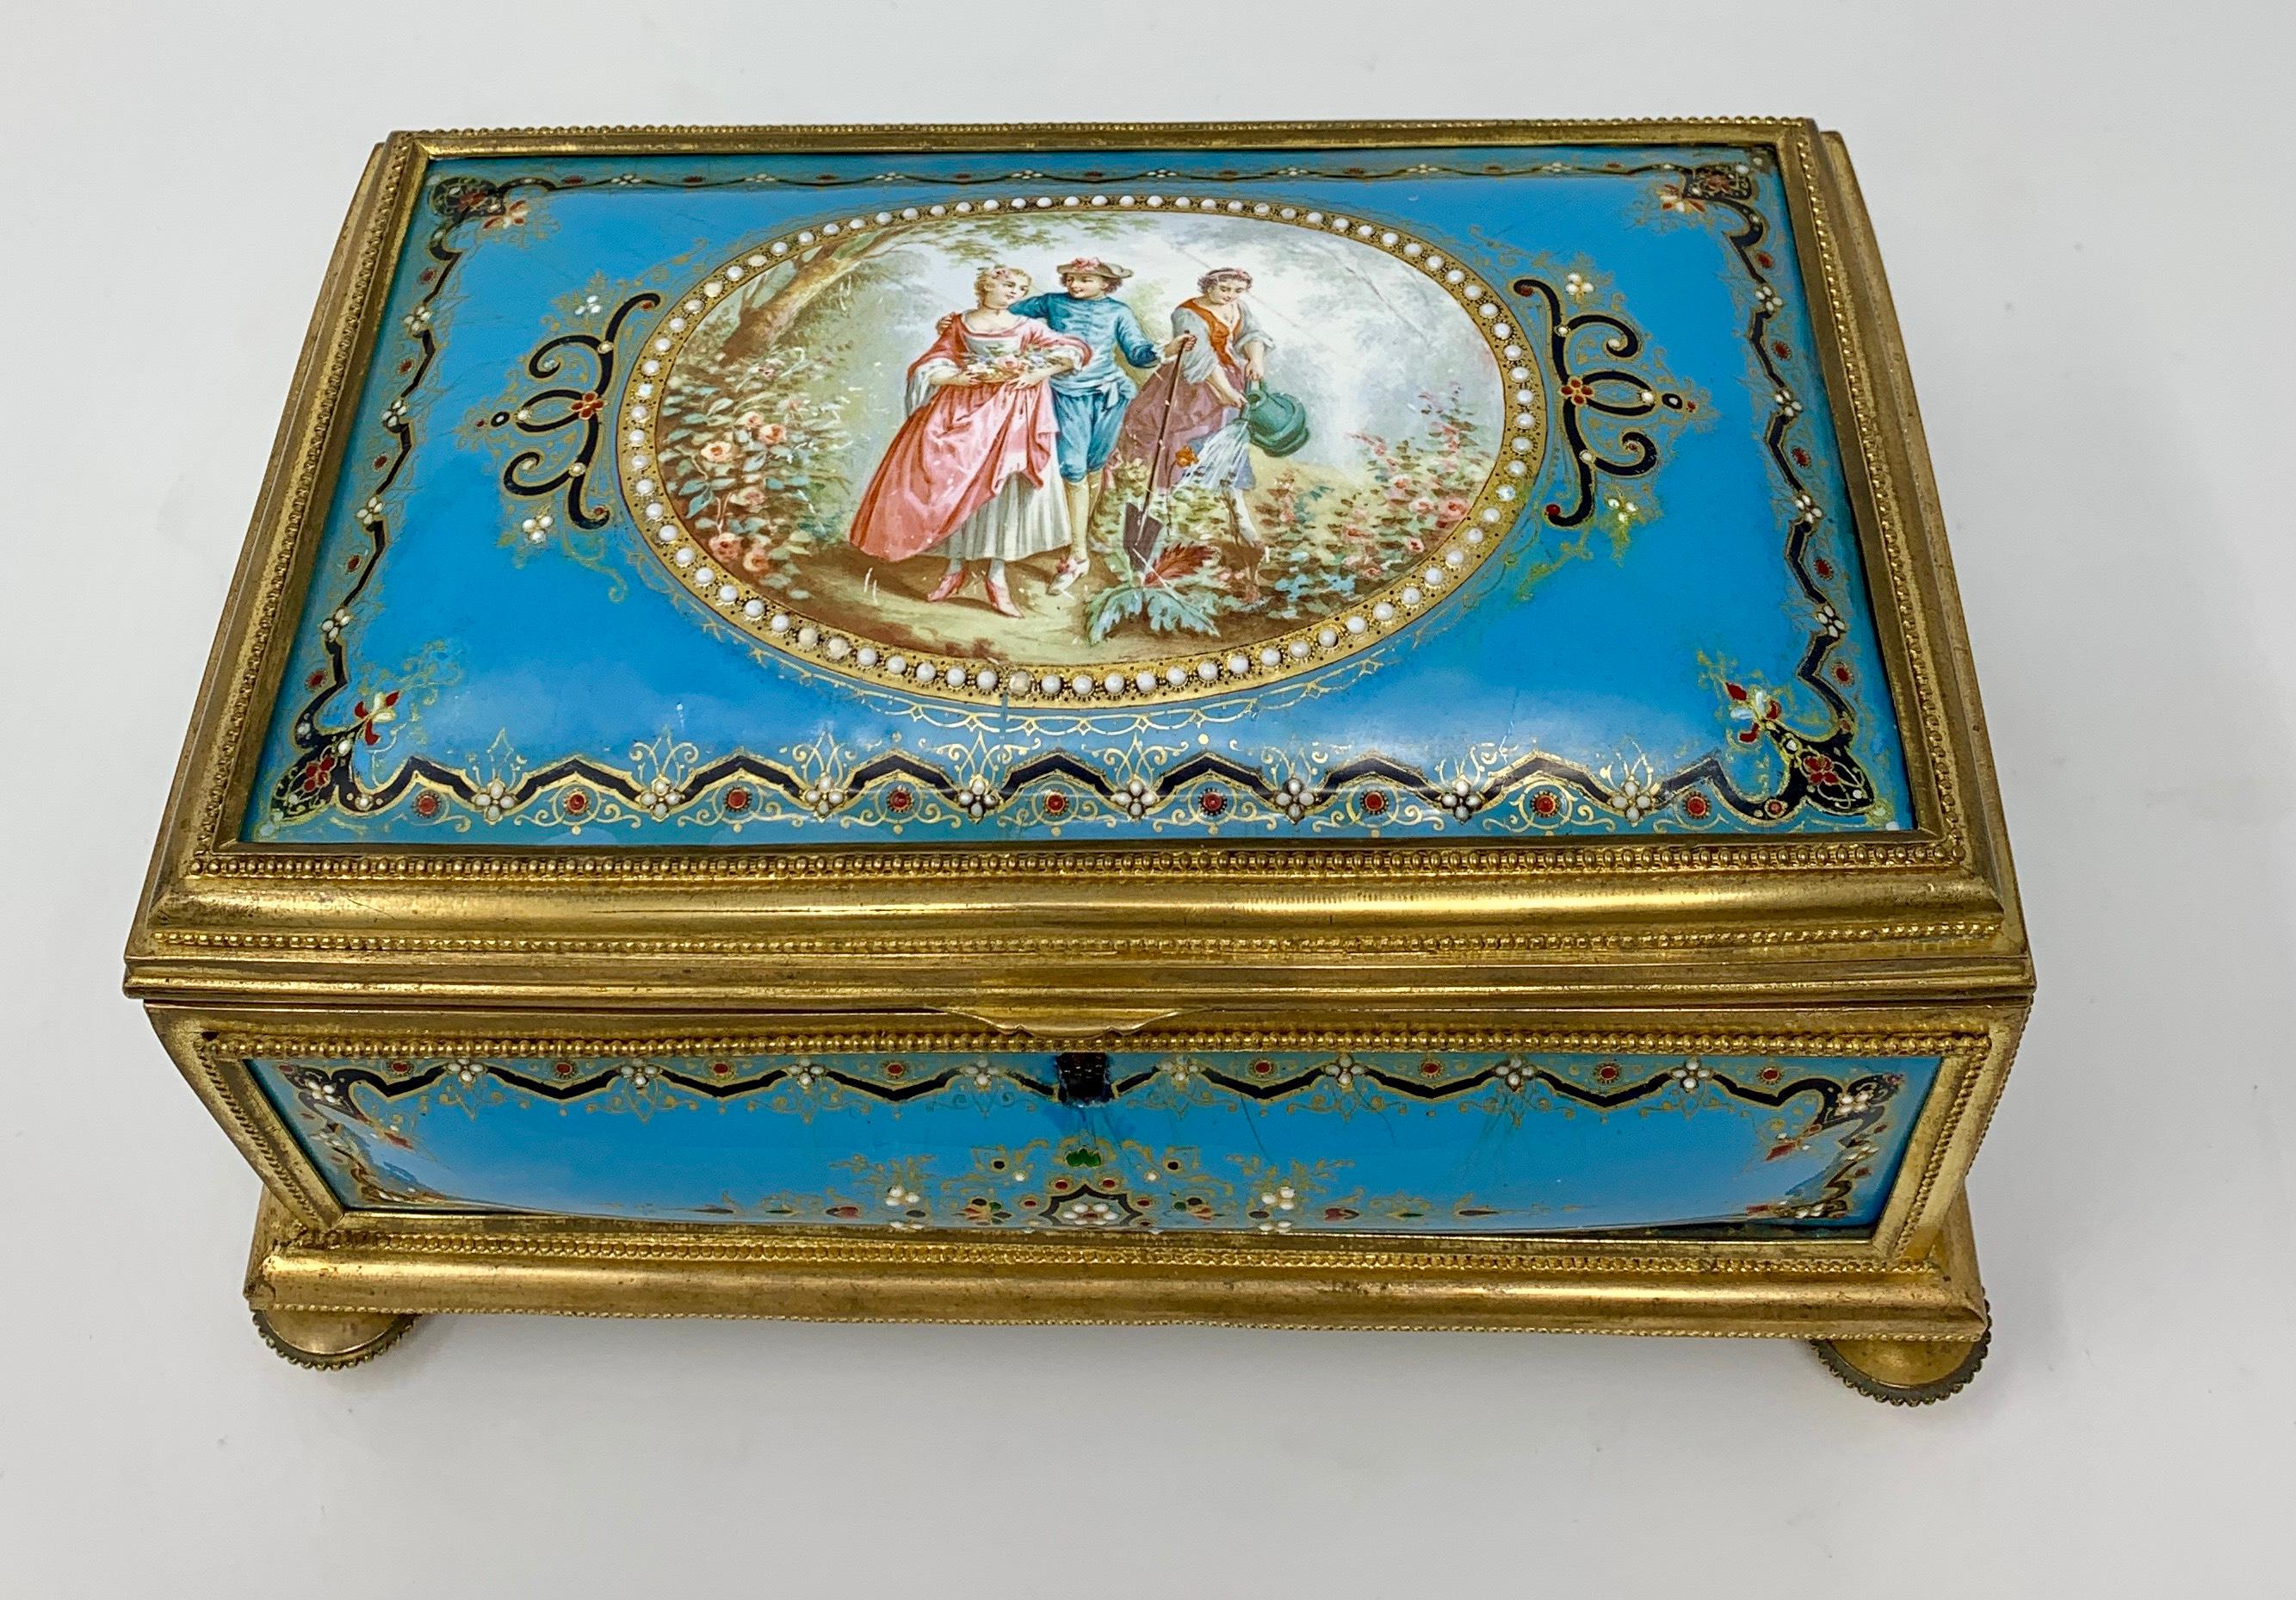 This is a jewel of a box. The blue enamel is vibrant. The work is wonderful. Treat yourself to a treasure!